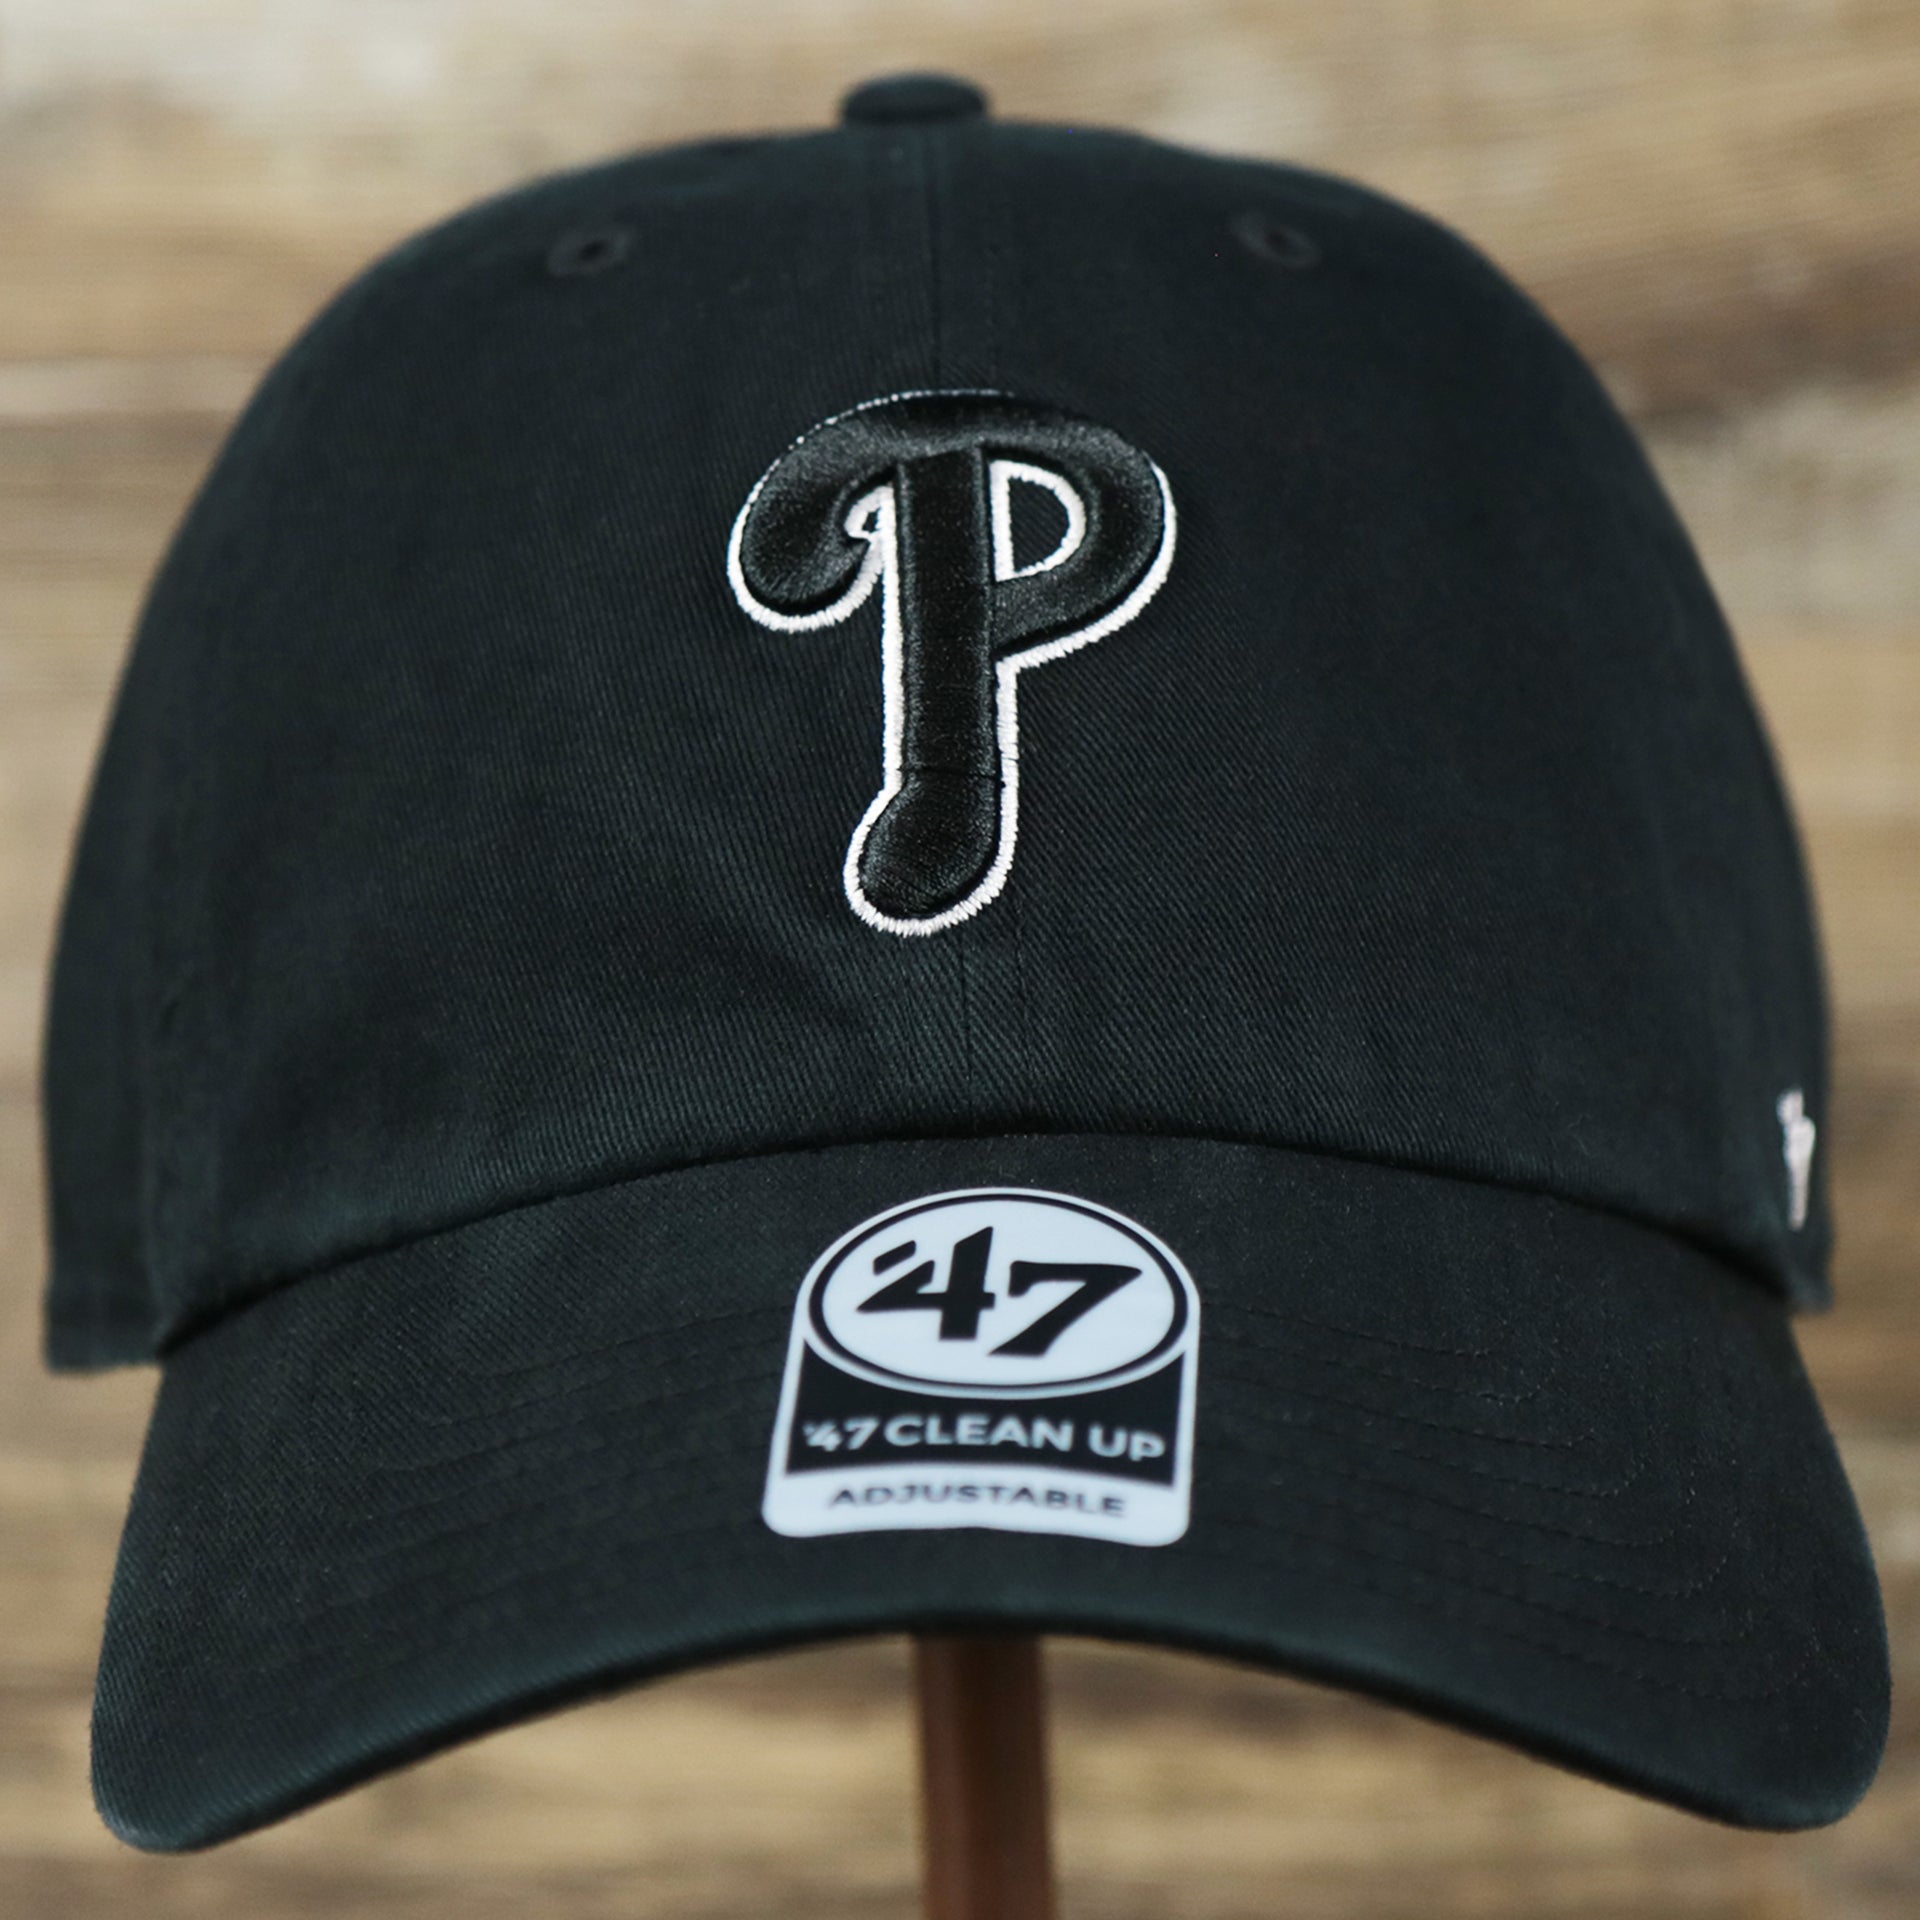 The front of the Cooperstown Philadelphia Phillies Vintage White Logo Dad Hat | Black Dad Hat